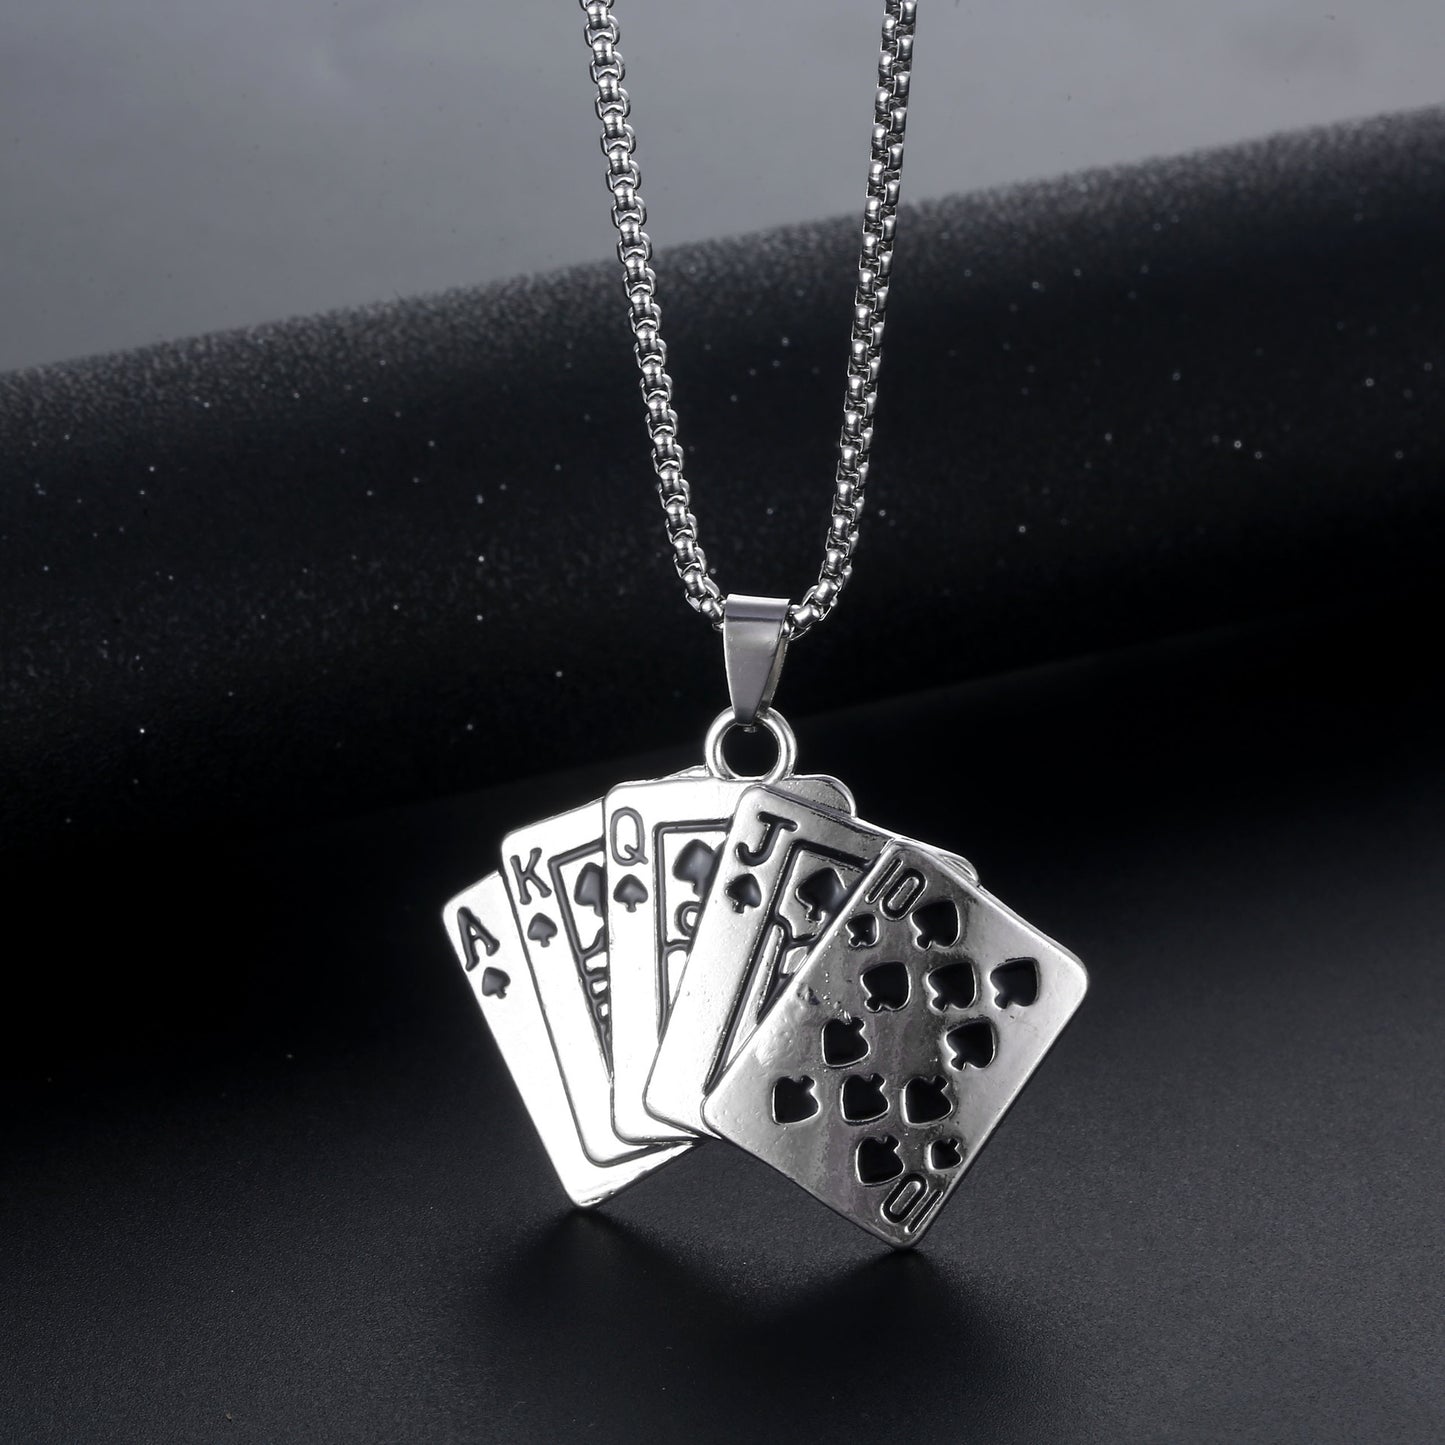 Women's & Men's & Full Diamond Playing Cards Jewelry Necklaces